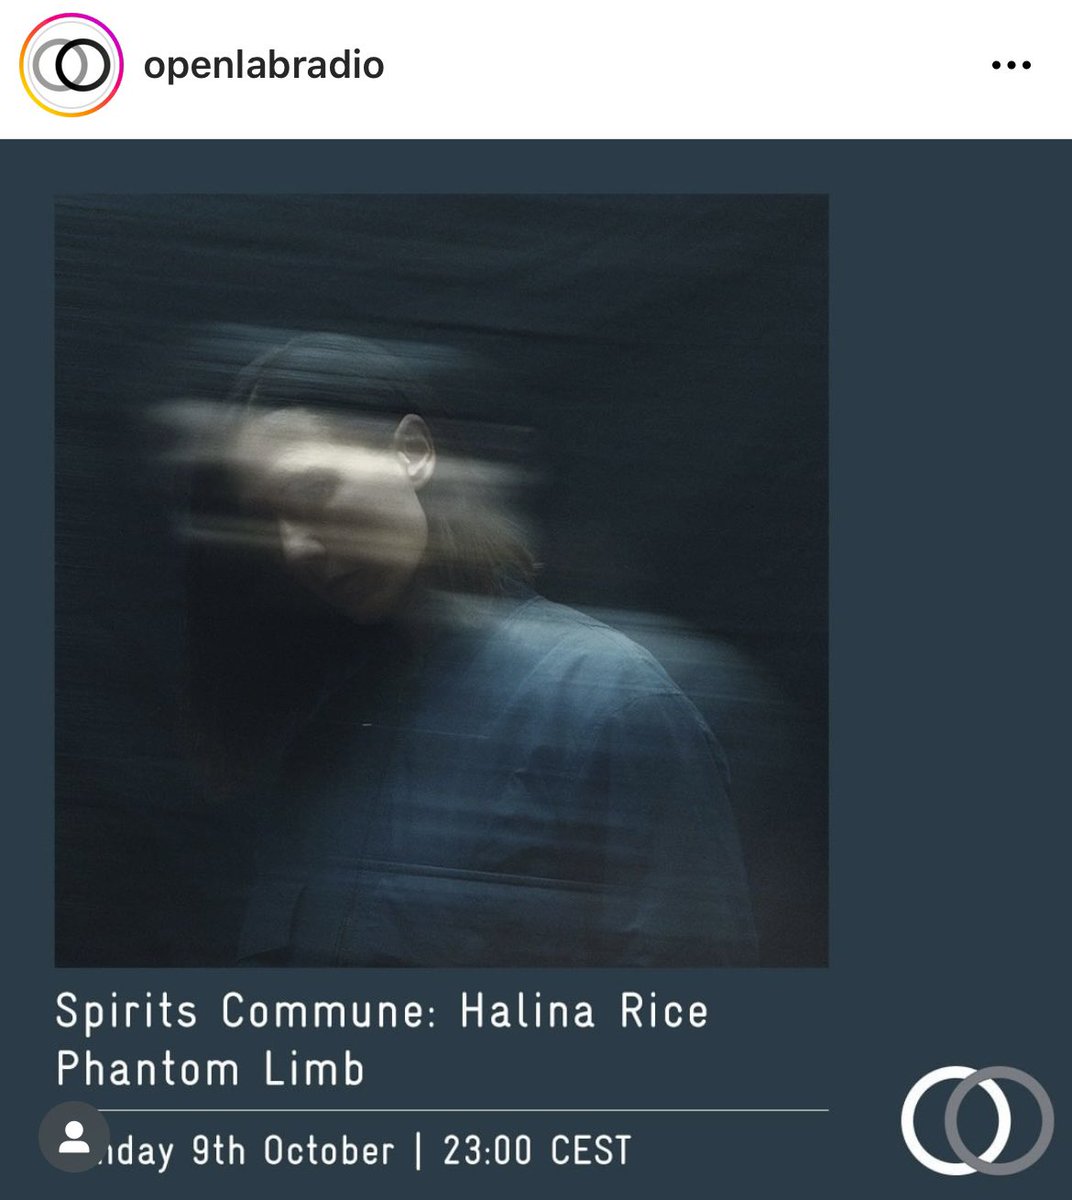 New mix for @phntmlimb show ‘Spirits Commune’ on @OpenLabRadio this evening 22:00 BST 23:00 CEST.

Featuring tracks by @GambleLee @PatchBae @Feldermelder @DavideTomat  @LaurelHalo @Aho_Ssan @cobysey @robclouth @7K_Music @subtextrecords  @mesh_label @injazerorecords